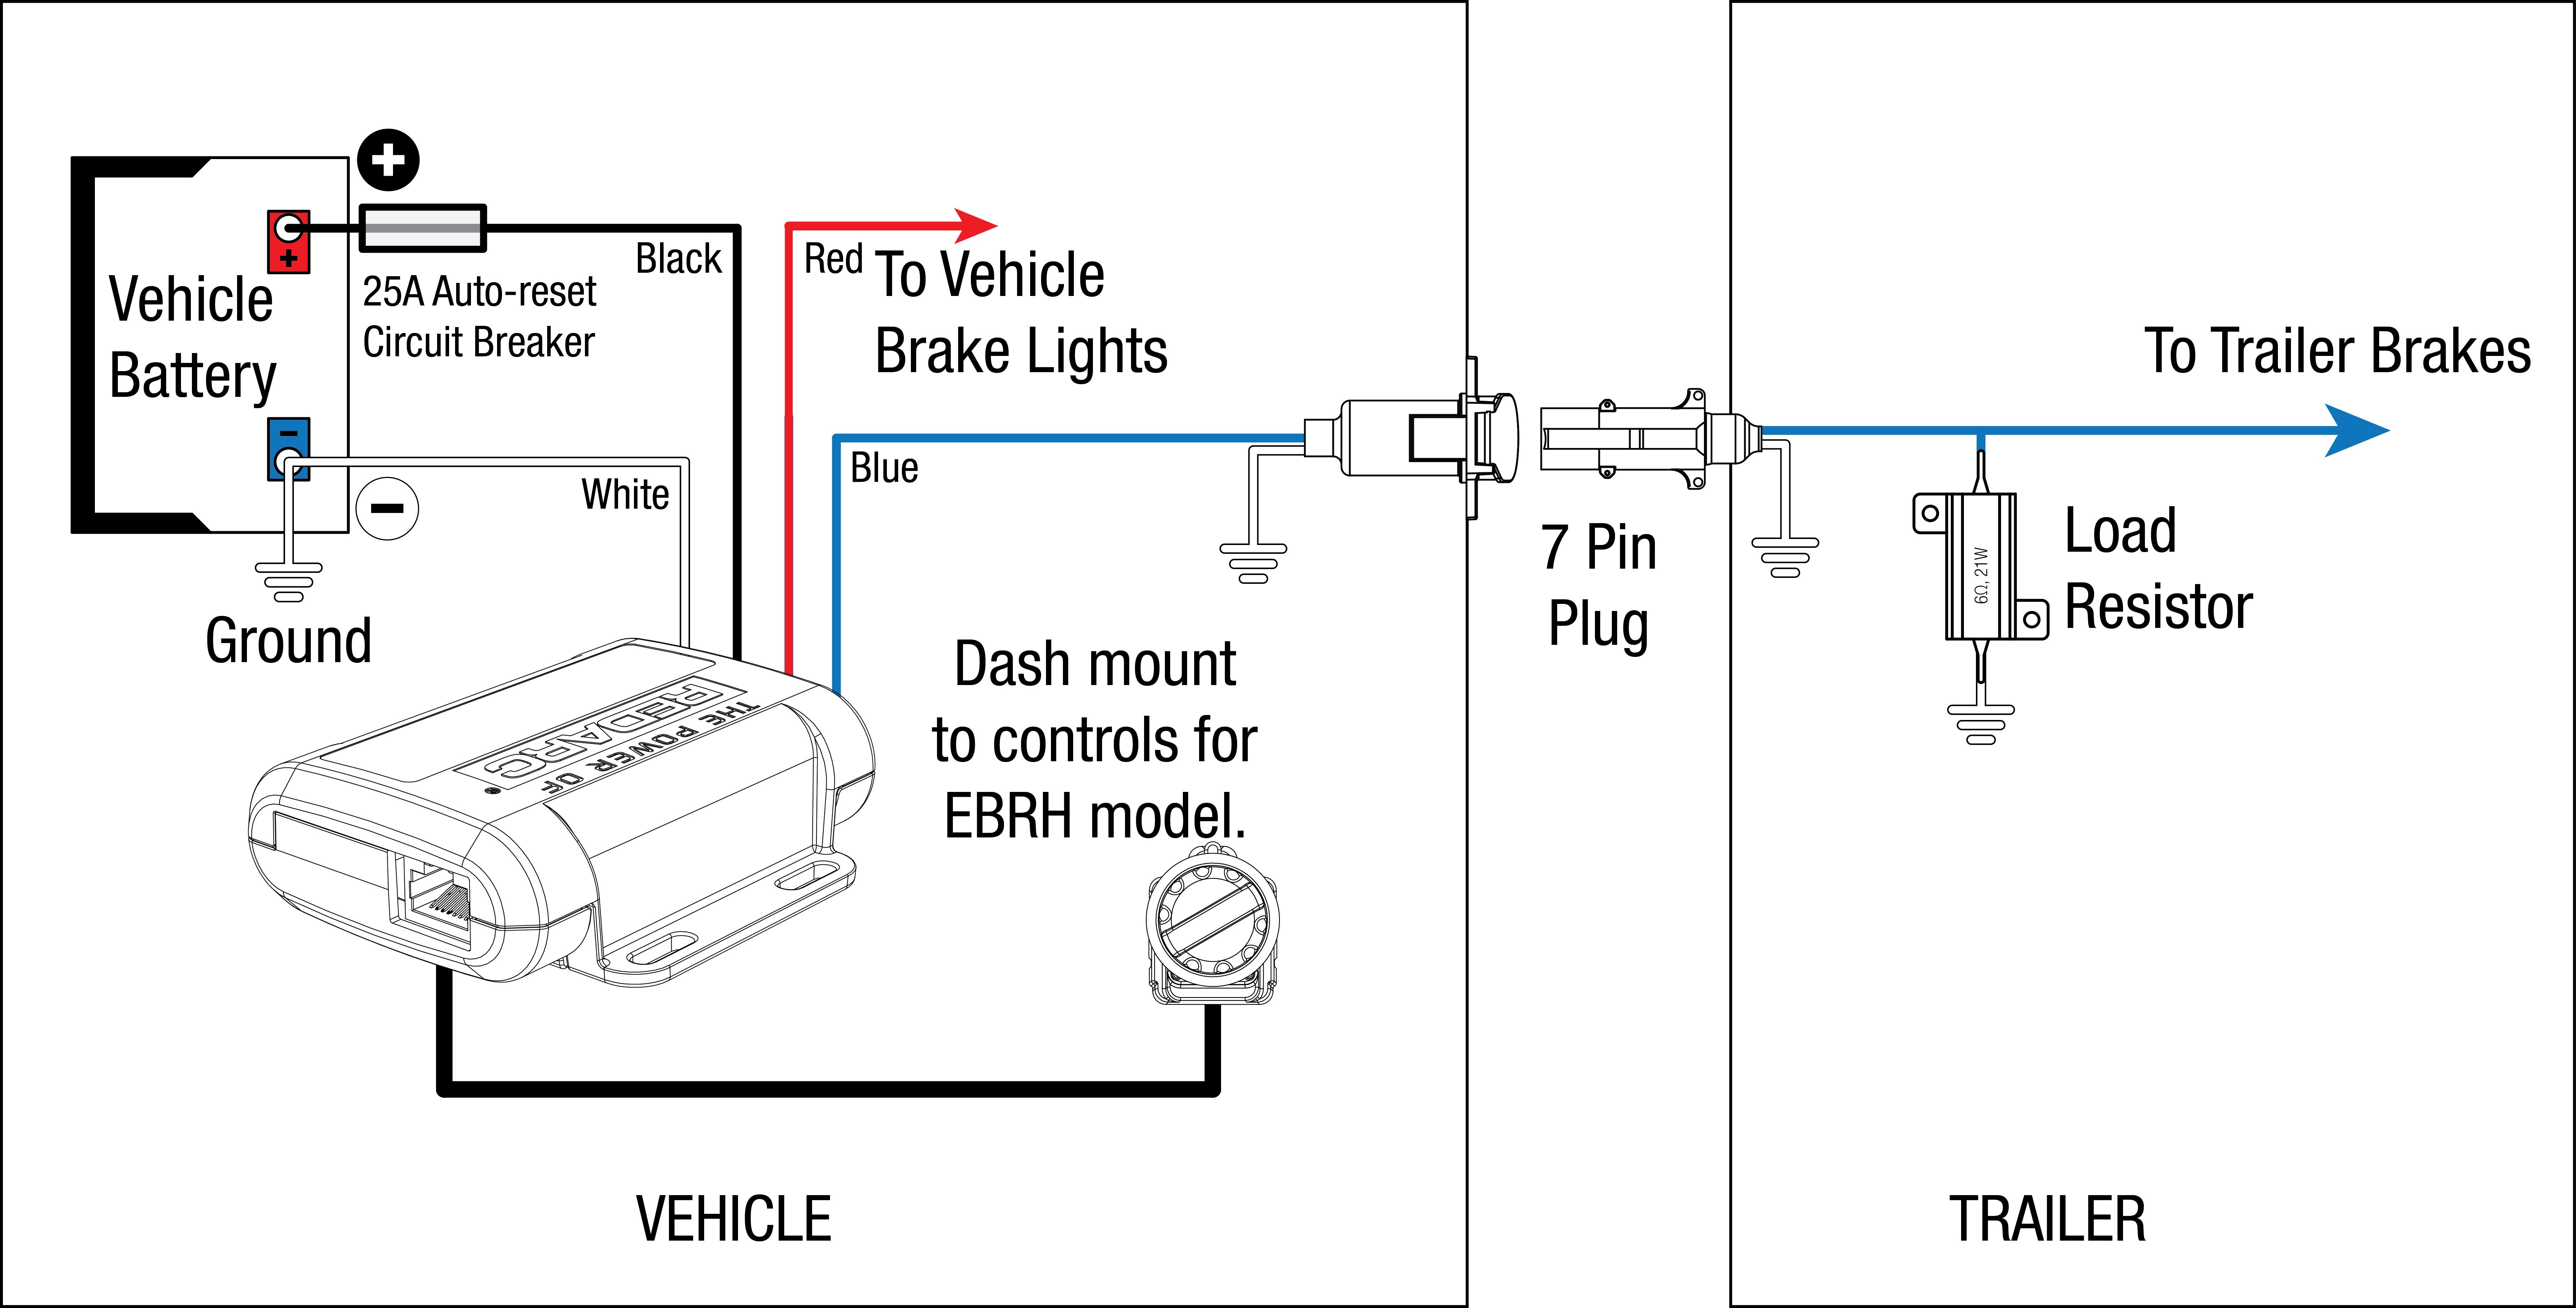 Light Wiring Diagram Awesome Delighted Parking Brake Switch Wiring Diagram Contemporary